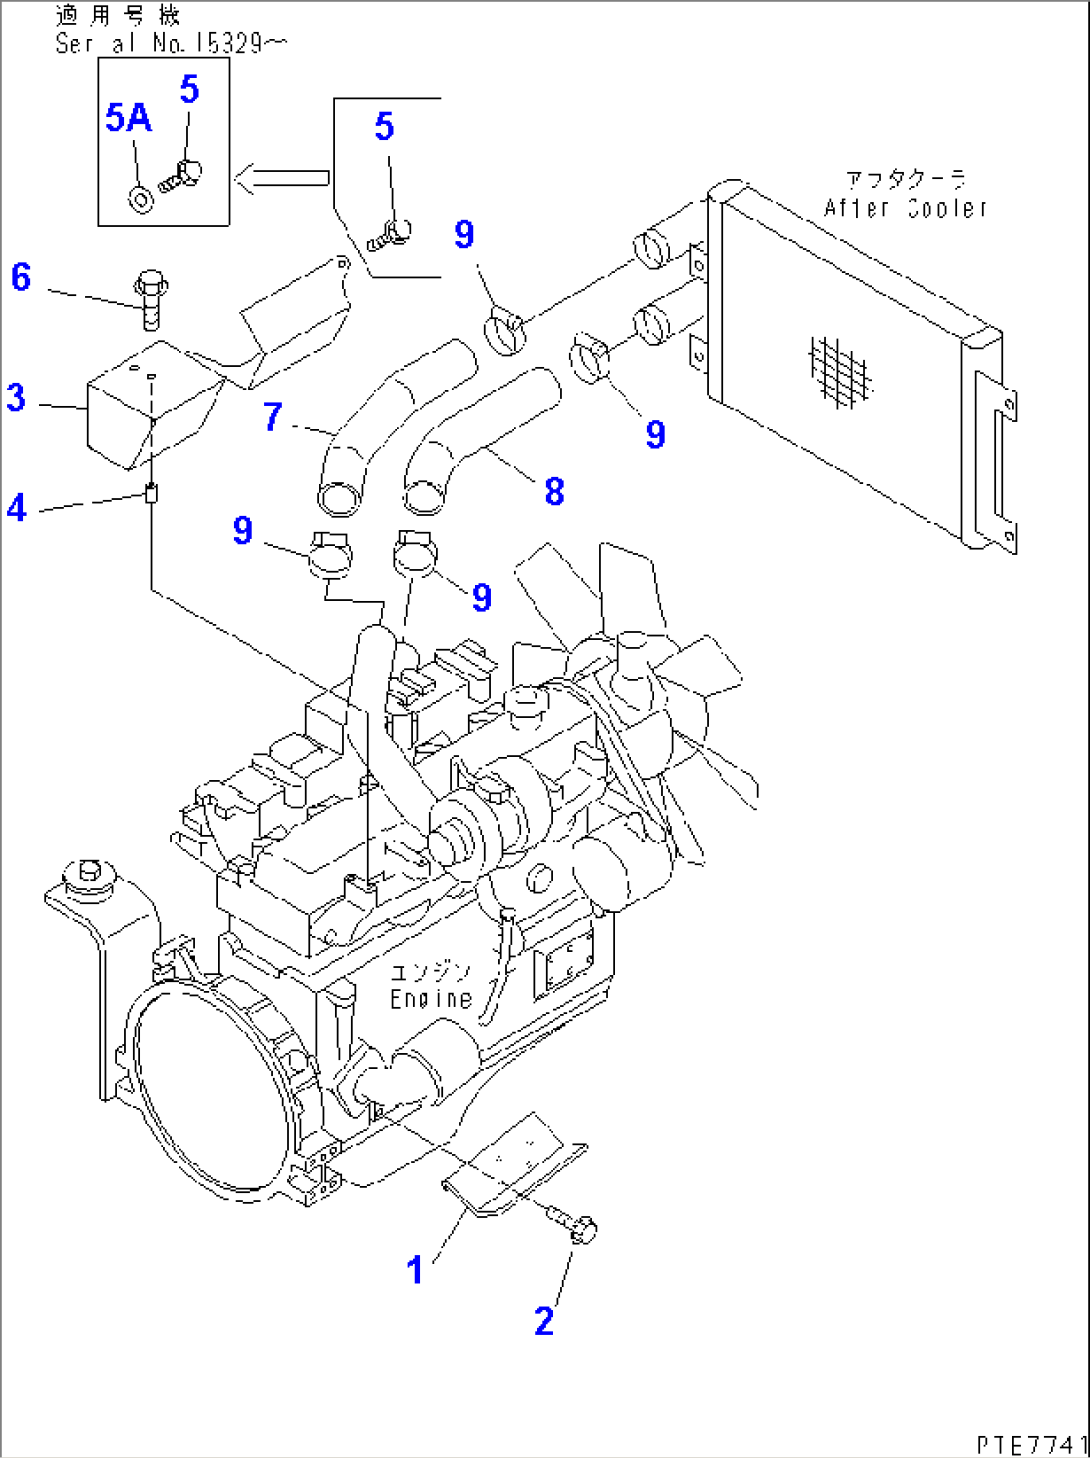 ENGINE (ENGINE AND COVER)(#15301-)